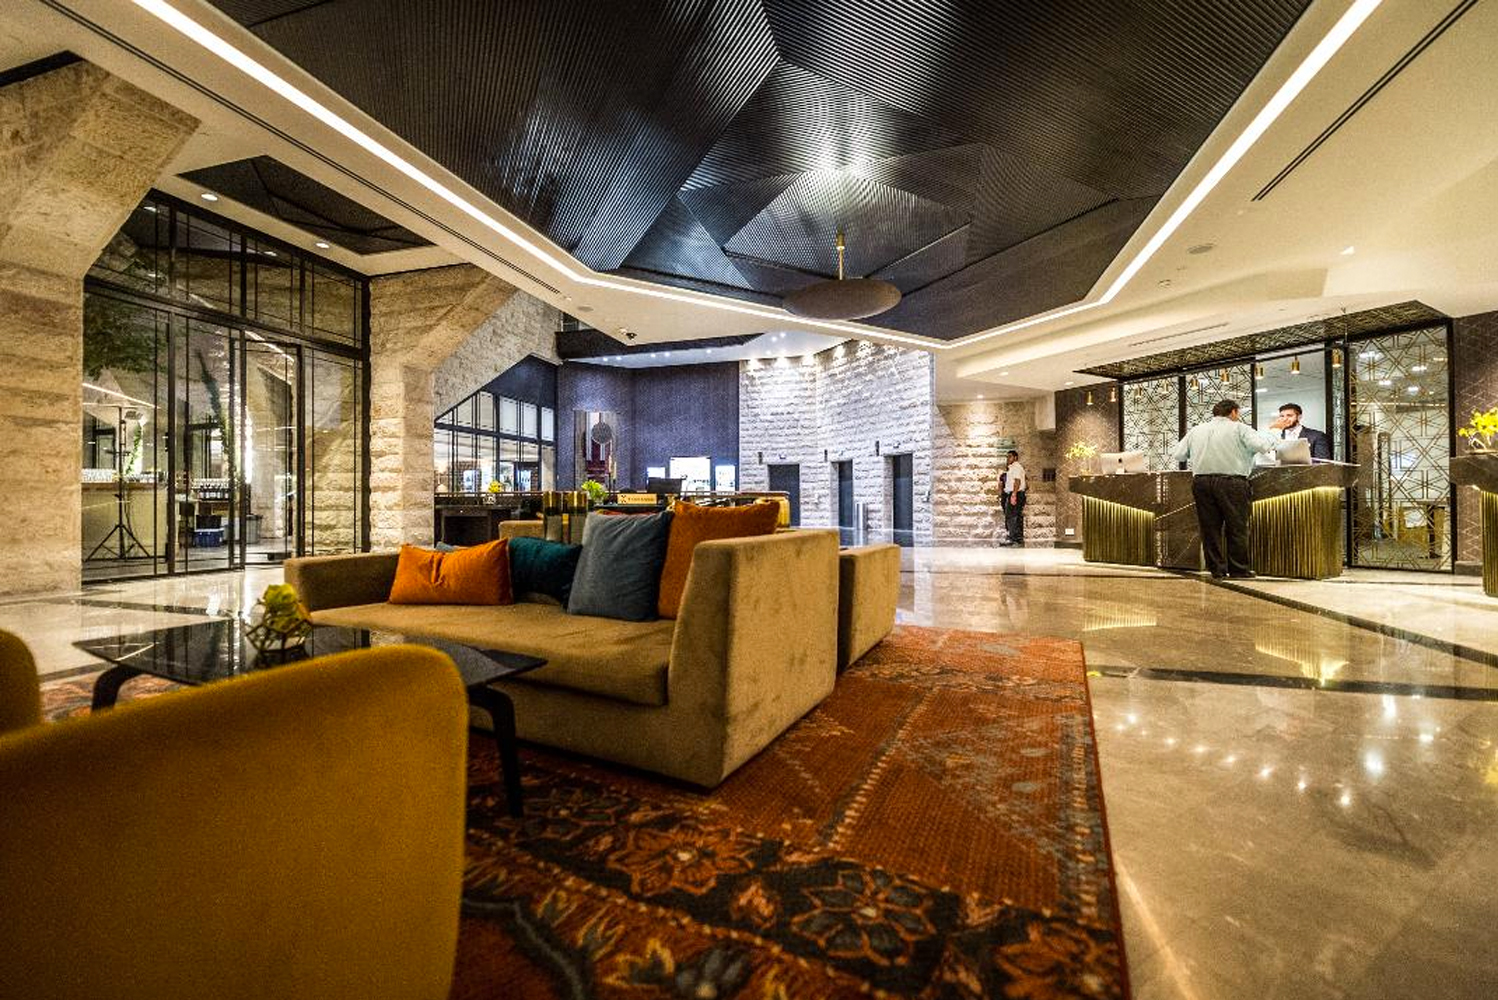 The Inbal Hotel in Jerusalem completed its new wing and fully renovated public areas 